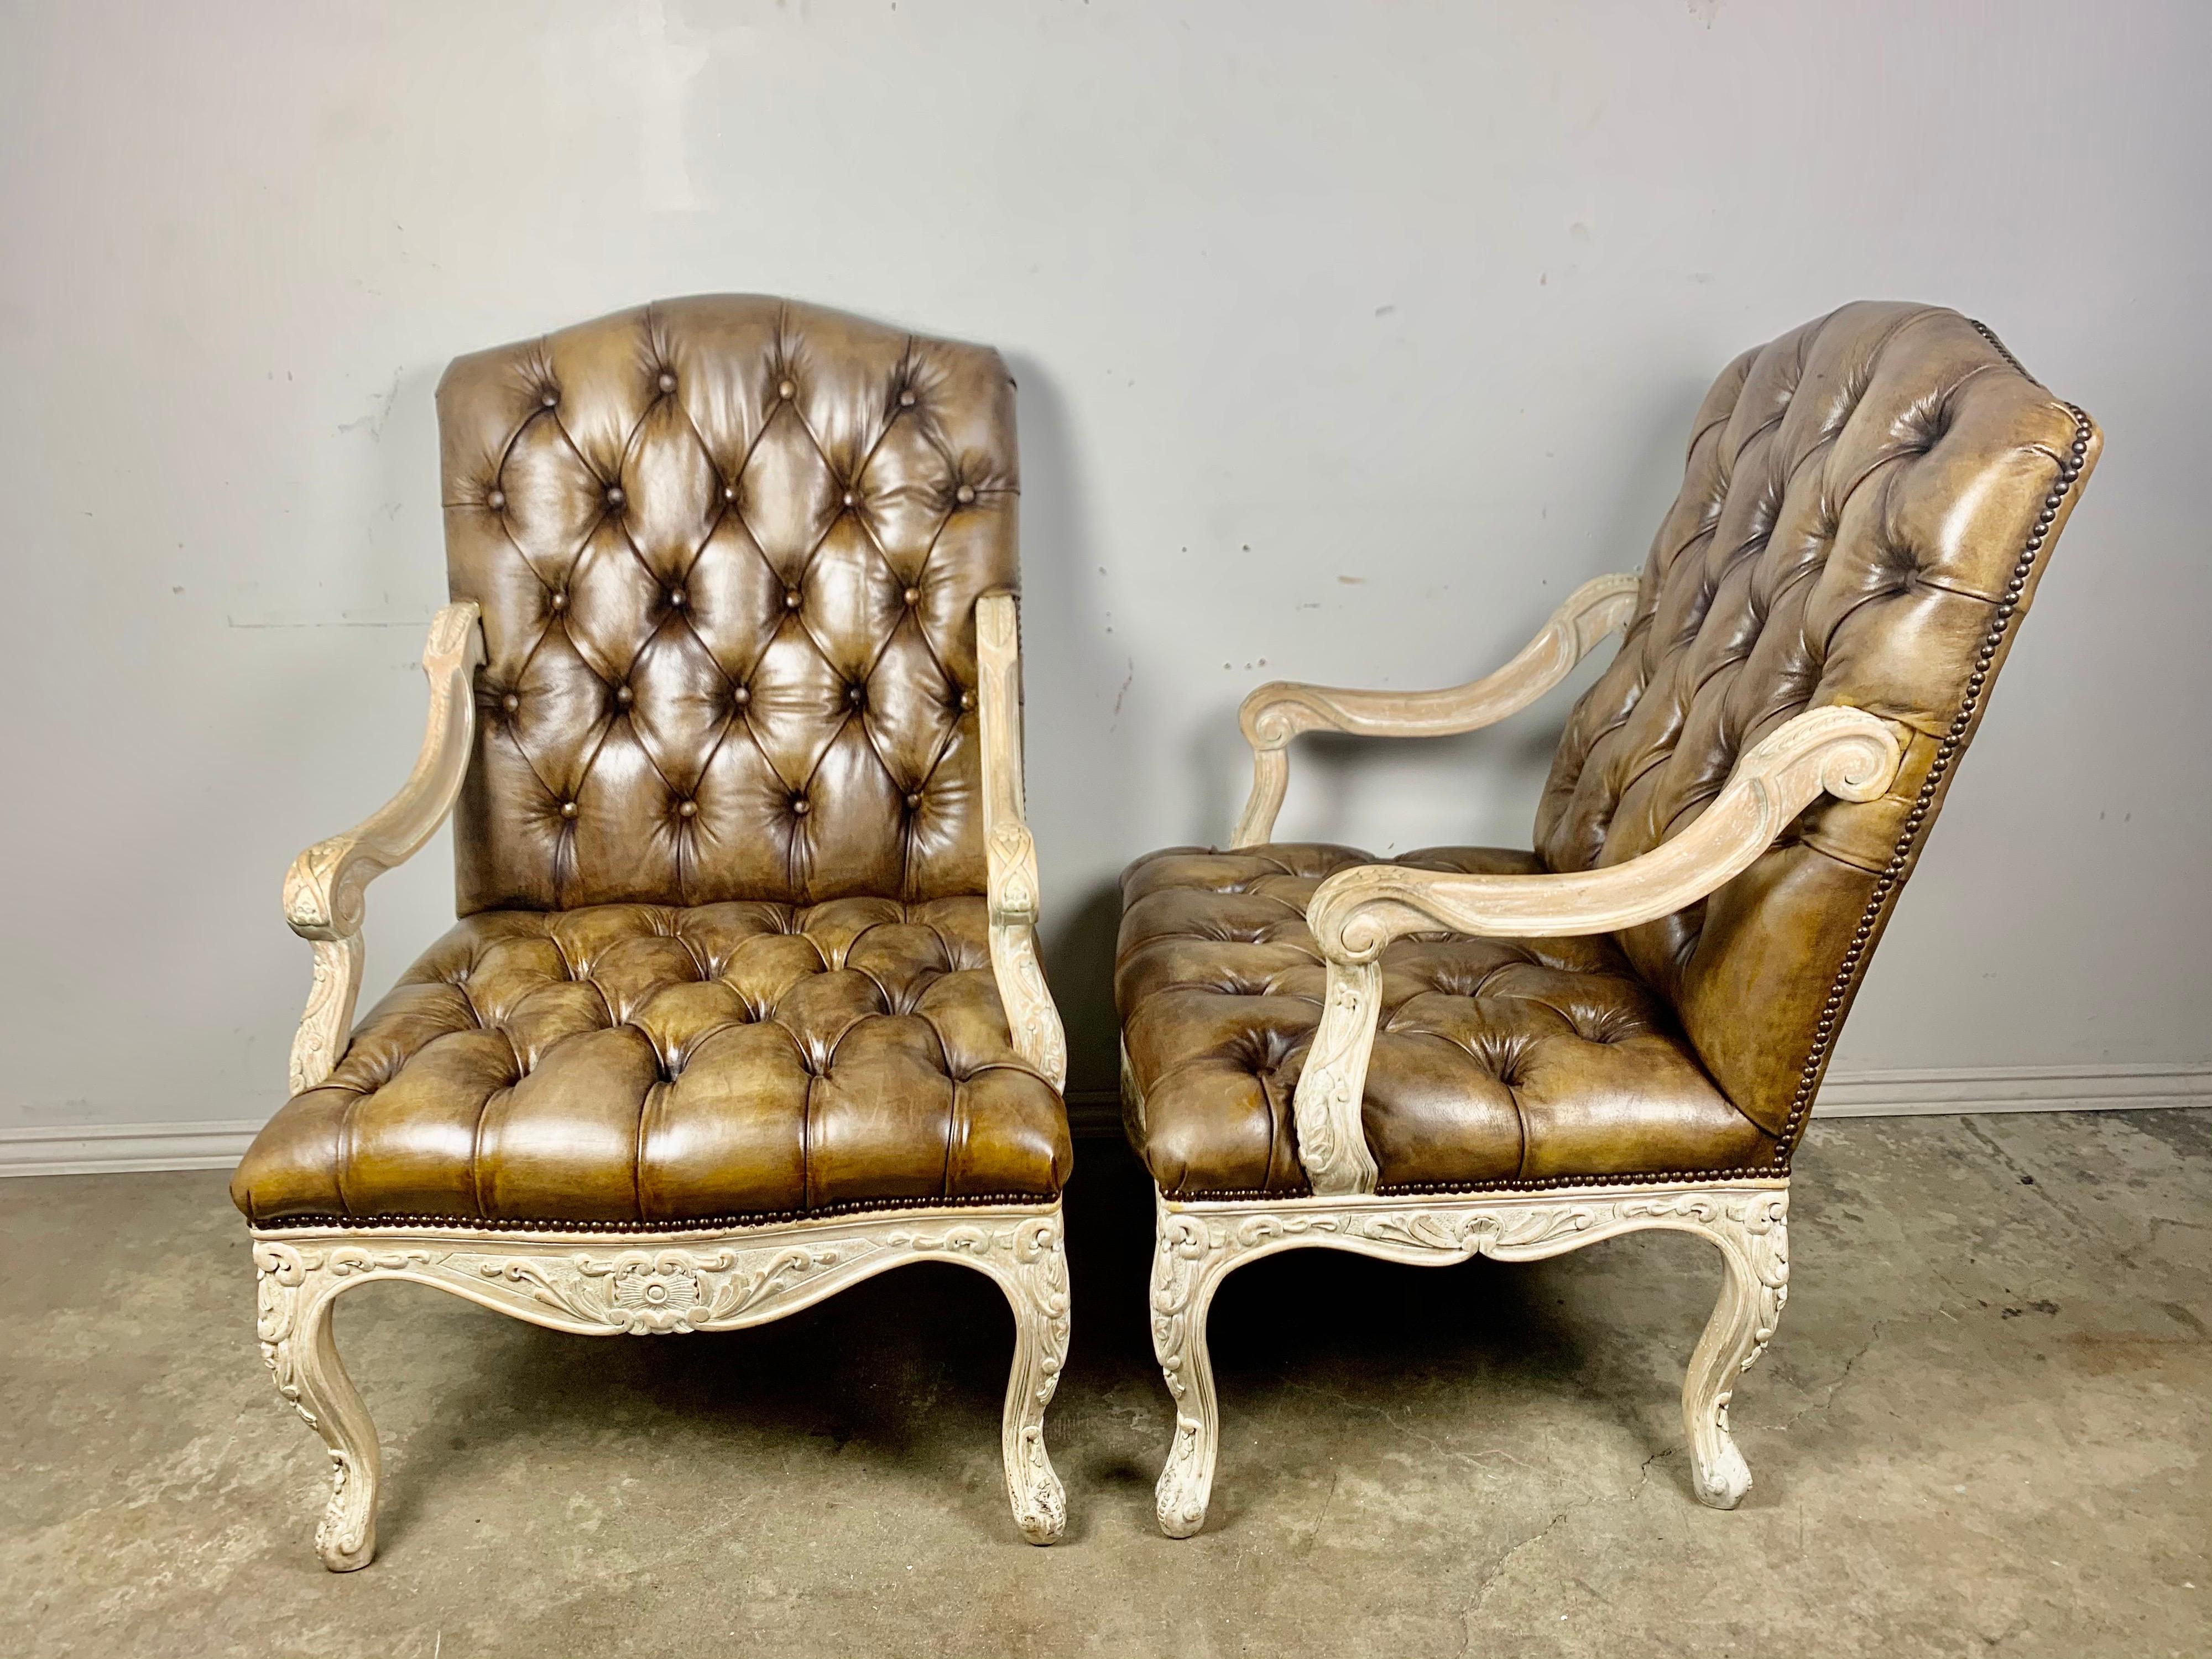 Pair of 1940s French carved wood armchairs that are upholstered in tobacco colored leather and finished with antique brass colored nailhead trim detail.